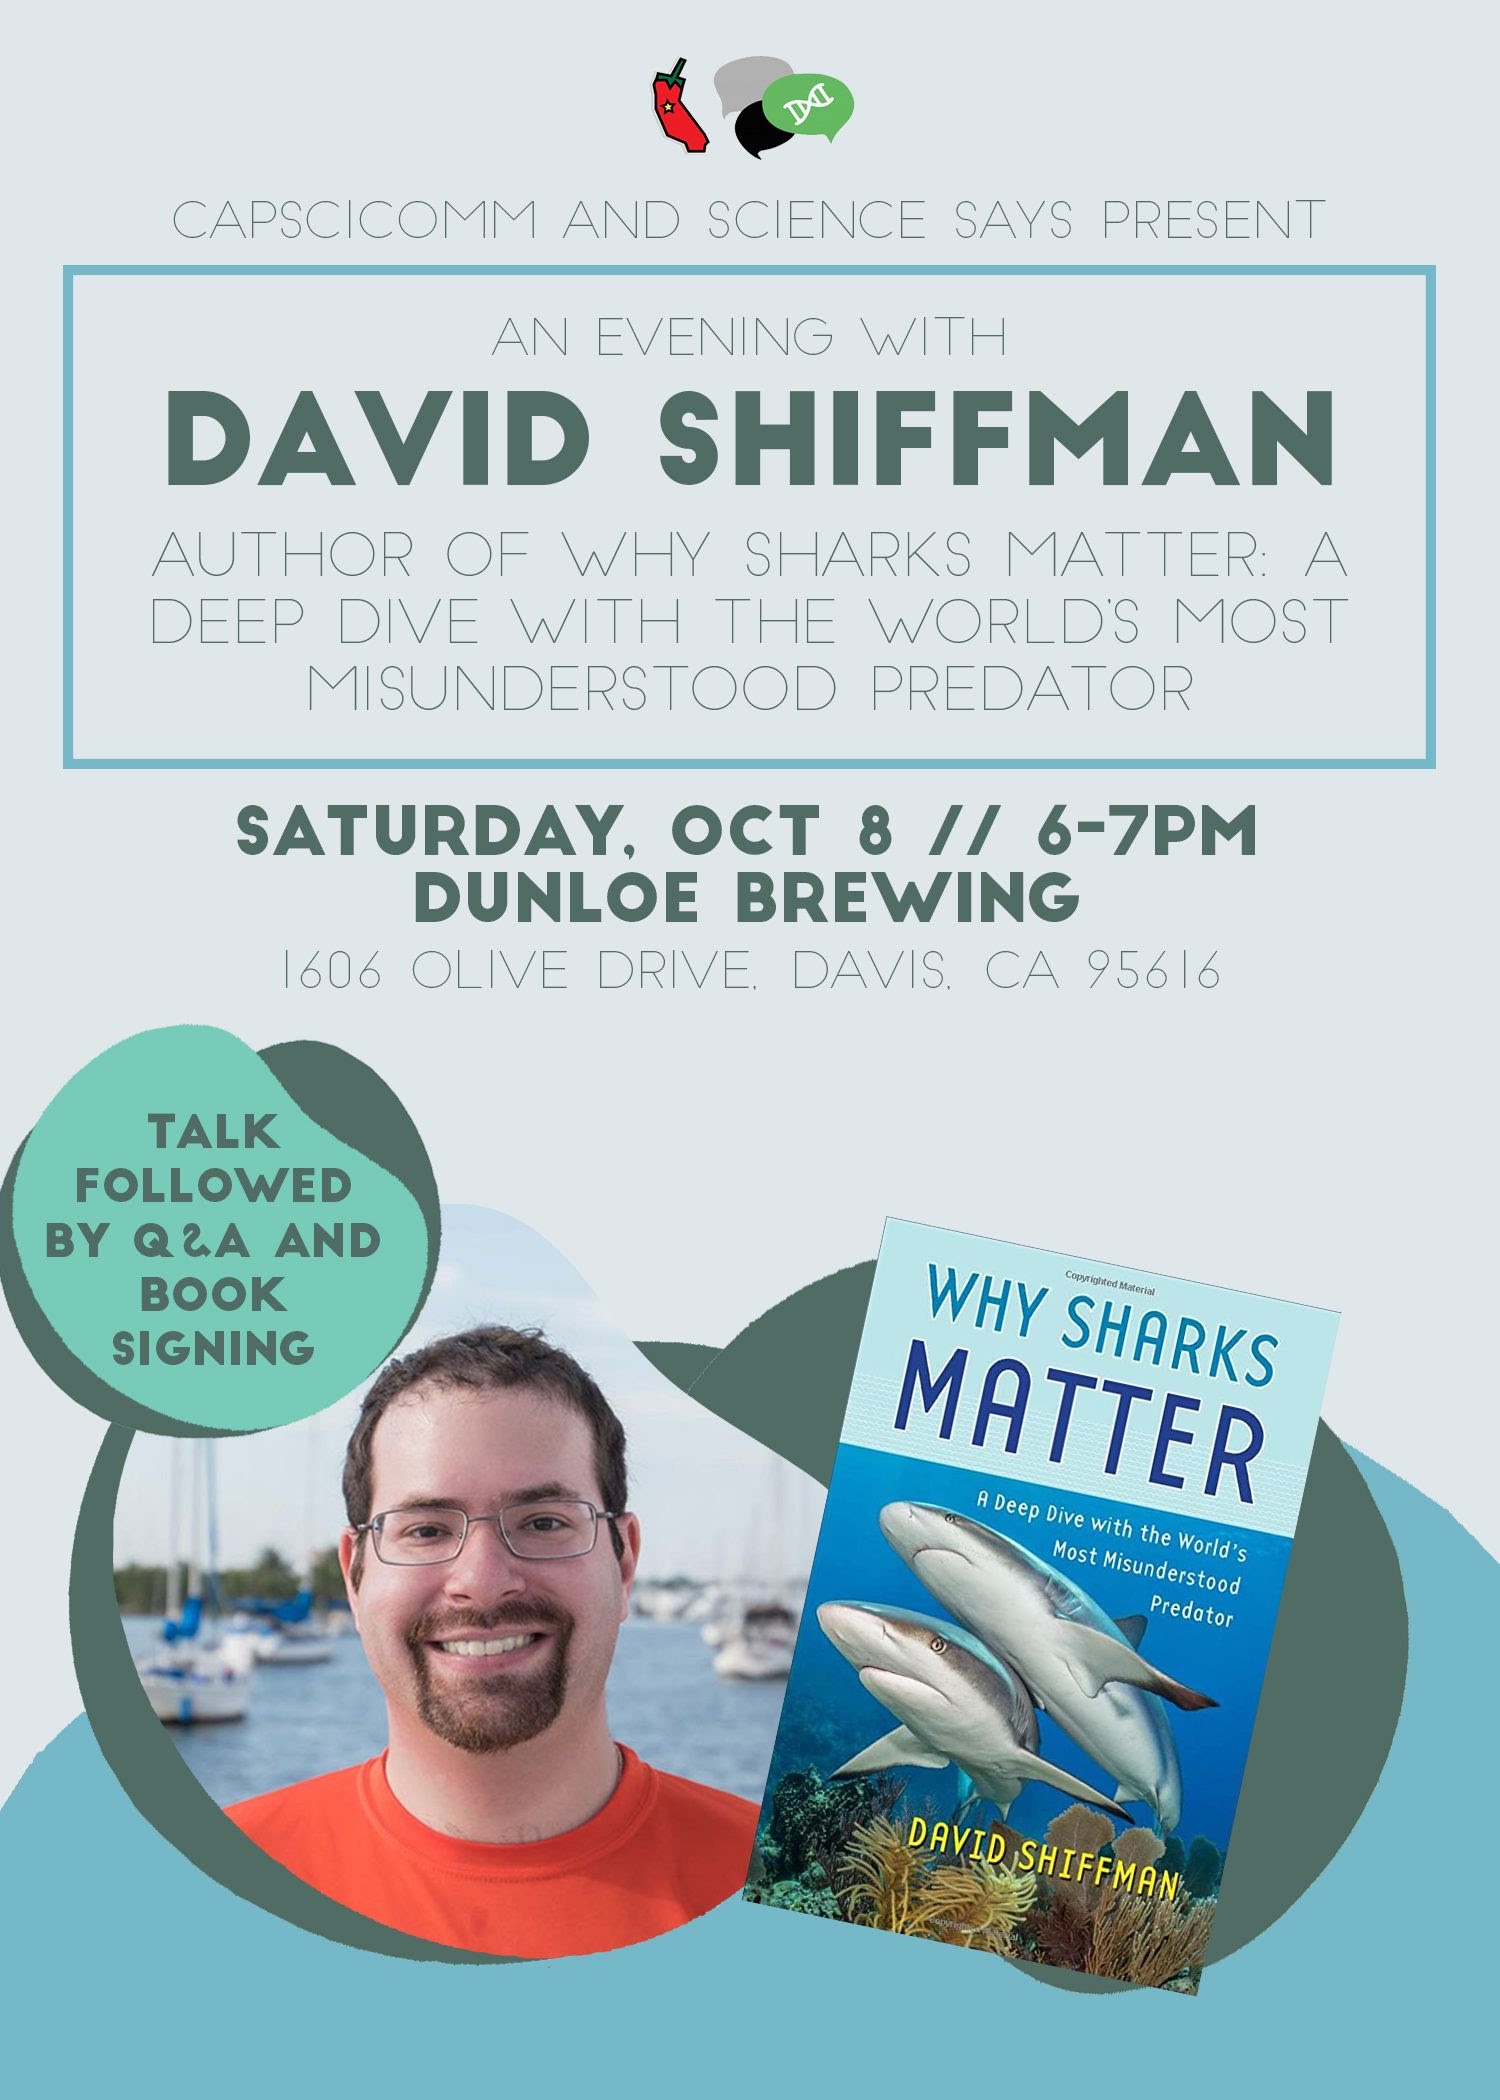 Text reads "Cap Sci Comm and Science Says present An Evening with David Shiffman. Author of Why Sharks Matter: A Deep Dive with the World's Most Misunderstood Predator. Saturday, October 8th, 6-7 p.m. Dunloe Brewing, 1606 Olive Drive, Davis, California 95616. Talk followed by Q & A and book signing." Image of David Shiffman and the book cover are also included.